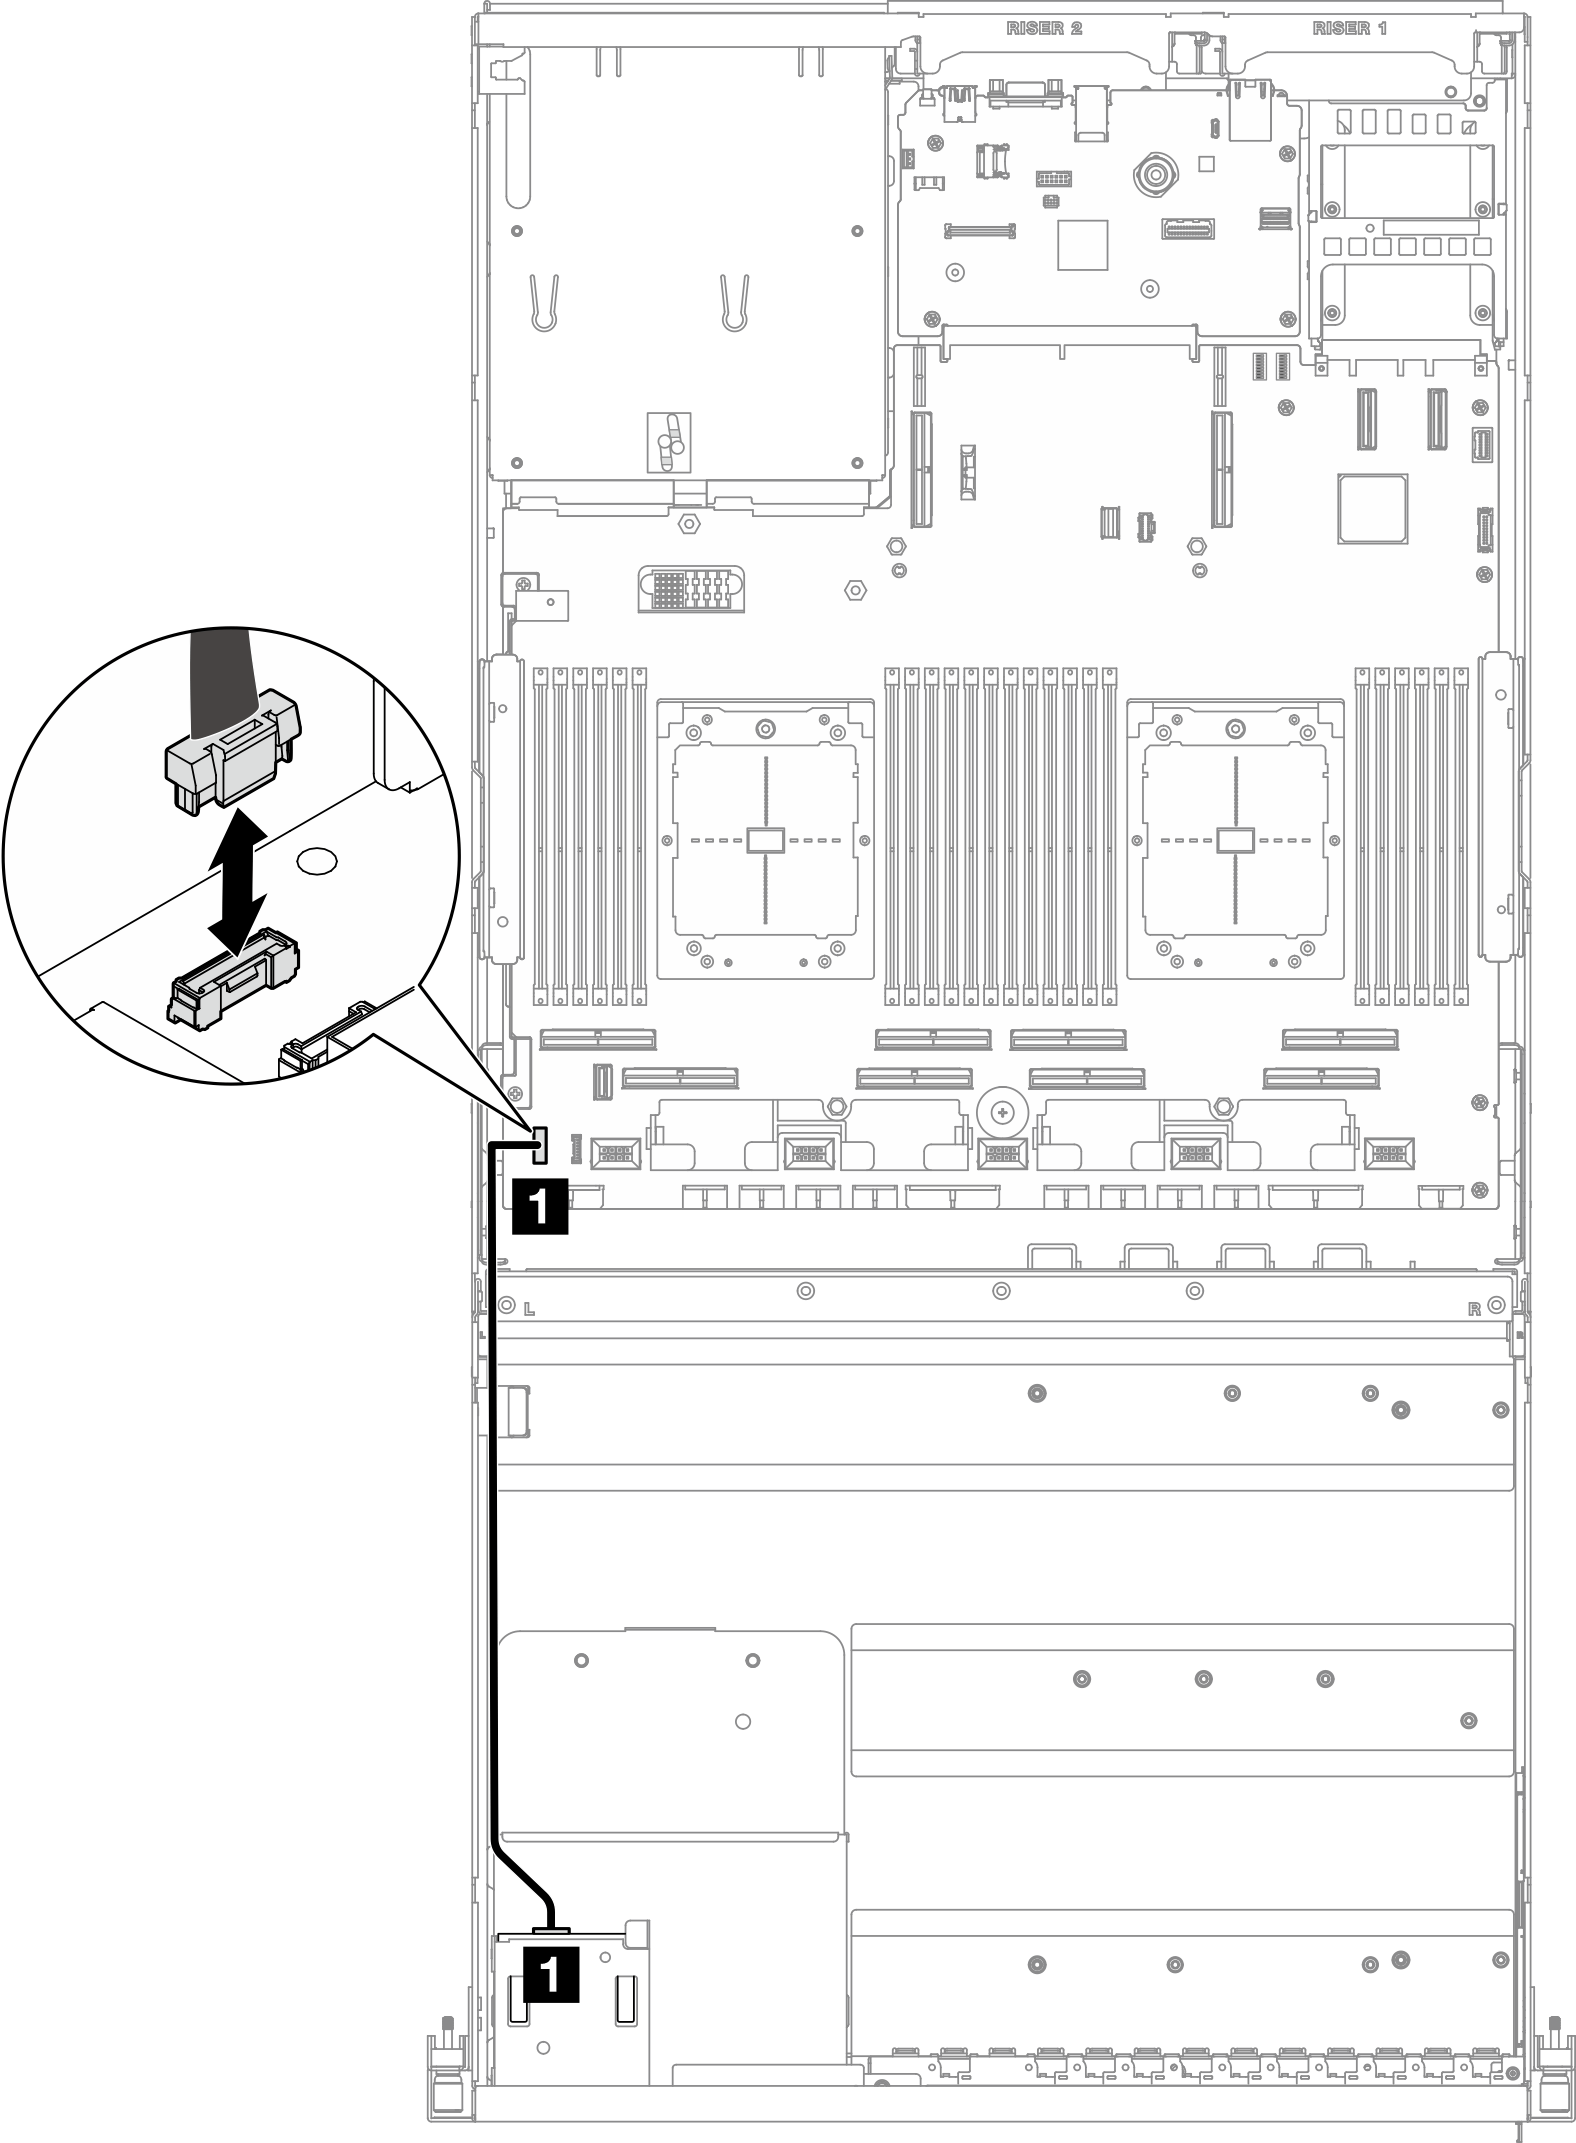 Front operator panel cable disconnection — 4-DW GPU 모델 and 8-DW GPU 모델